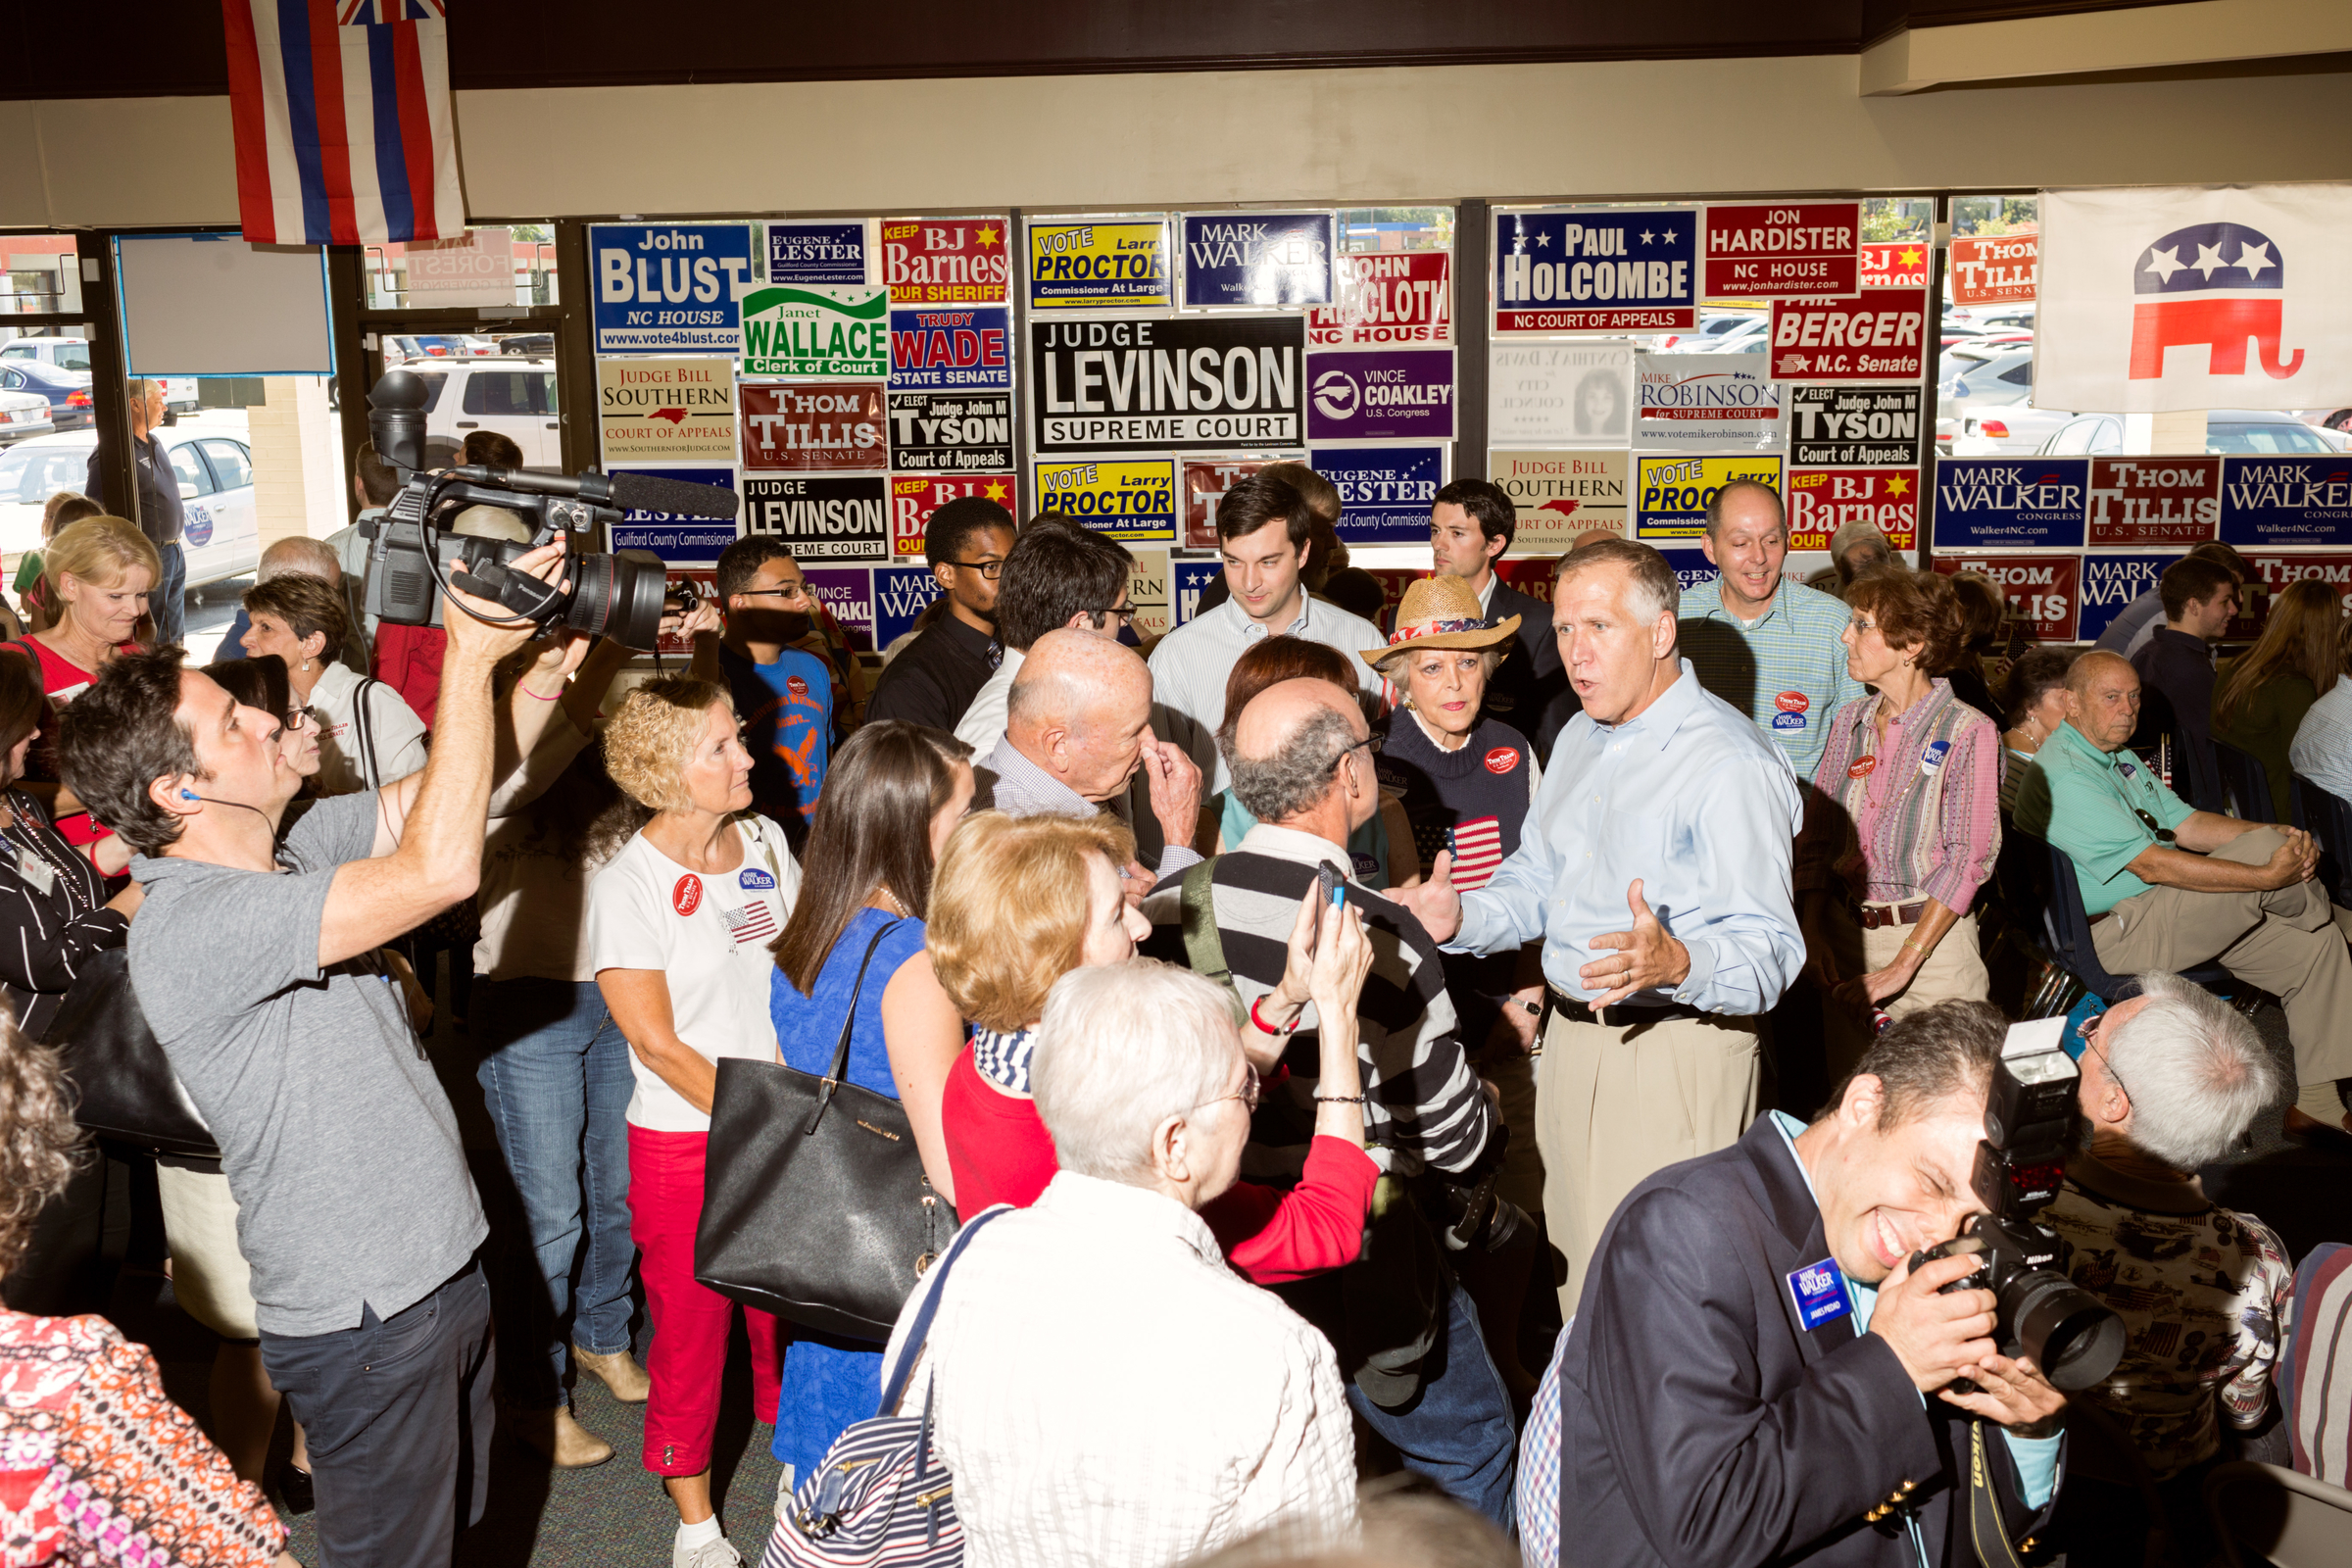 US Senate candidate Thom Tillis, right in blue shirt, greets and speaks to rally attendees at the Guildford County Republican Party headquarters in Greensboro, N.C. on Sept. 20, 2014. (Jeremy M. Lange for TIME)